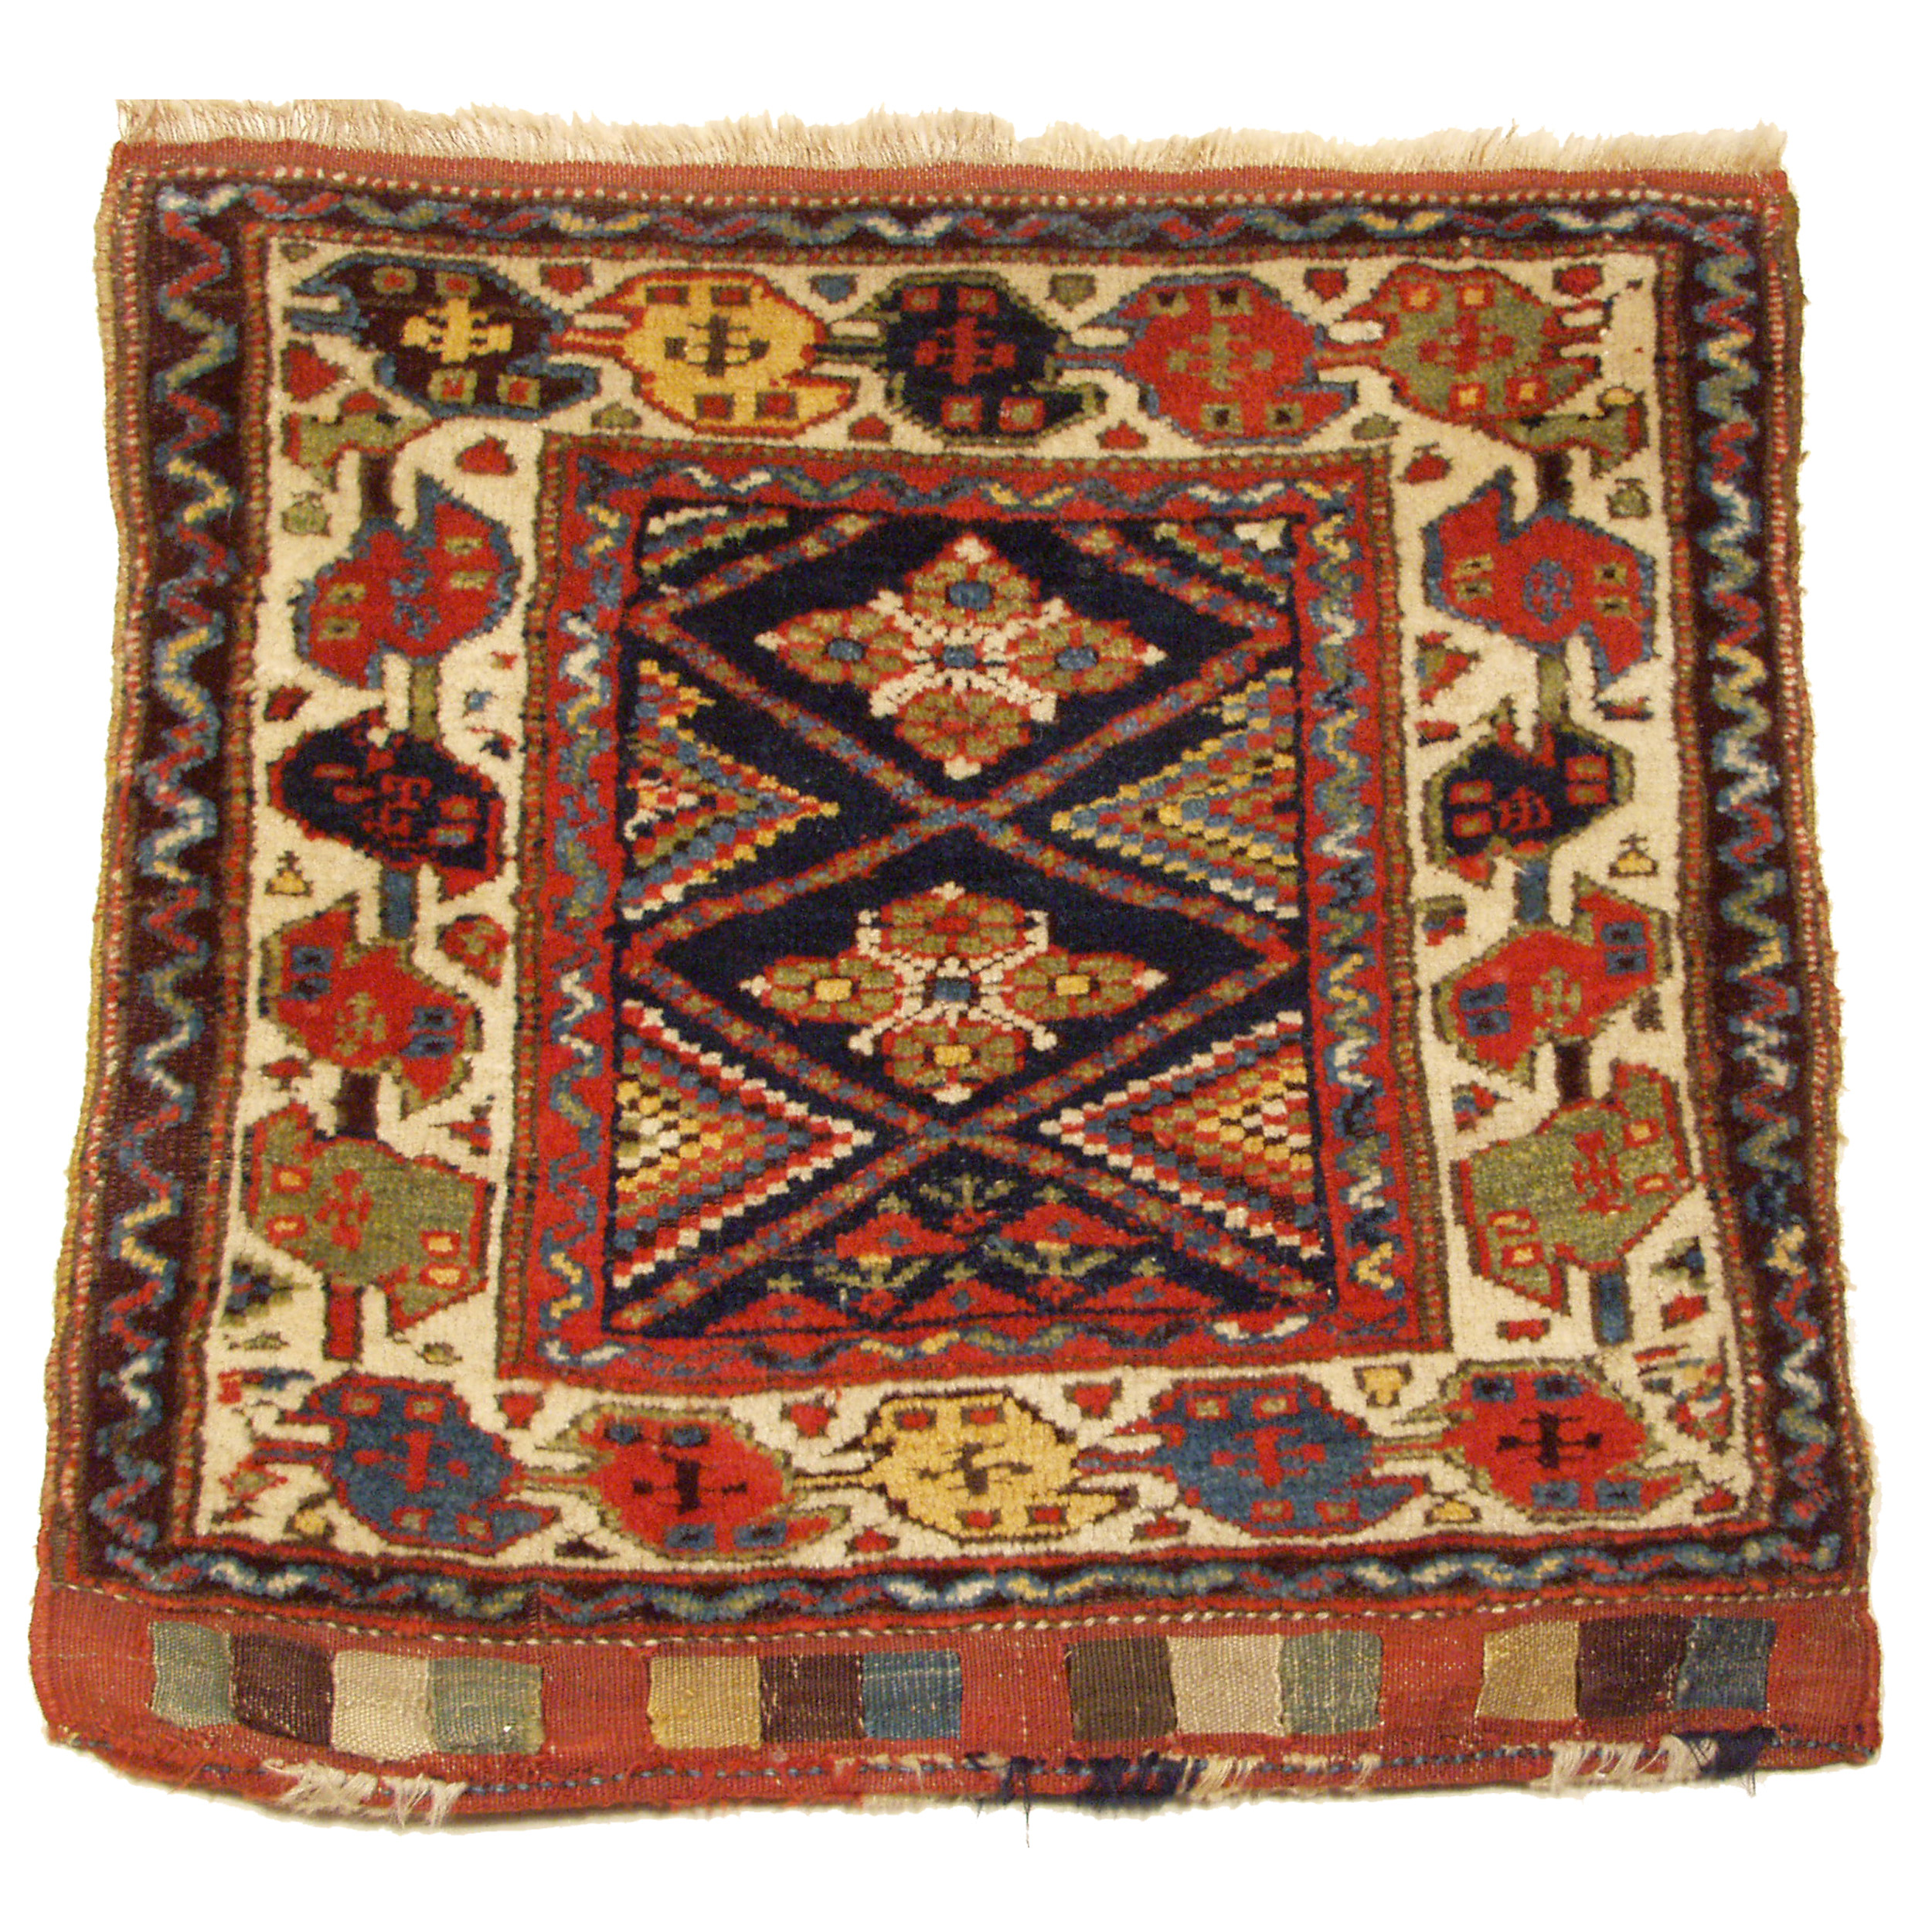 An antique Northwest Persian bag face, probably woven either by the Shah Savan or Kurdish tribes, circa 1880. The navy blue field is decorated with a lattice format and polychrome checkerboard motifs along the sides the field. An ivory "Bird" style border frames the field, circa 1880. Douglas Stock Gallery Antique Oriental Rug Research Archives are an excellent source of information for people interested in learning about antique Oriental rugs, antique carpets and collectable antique Persian and Caucasian bags and bag faces, Douglas Stock Gallery, antique rugs Boston,MA area